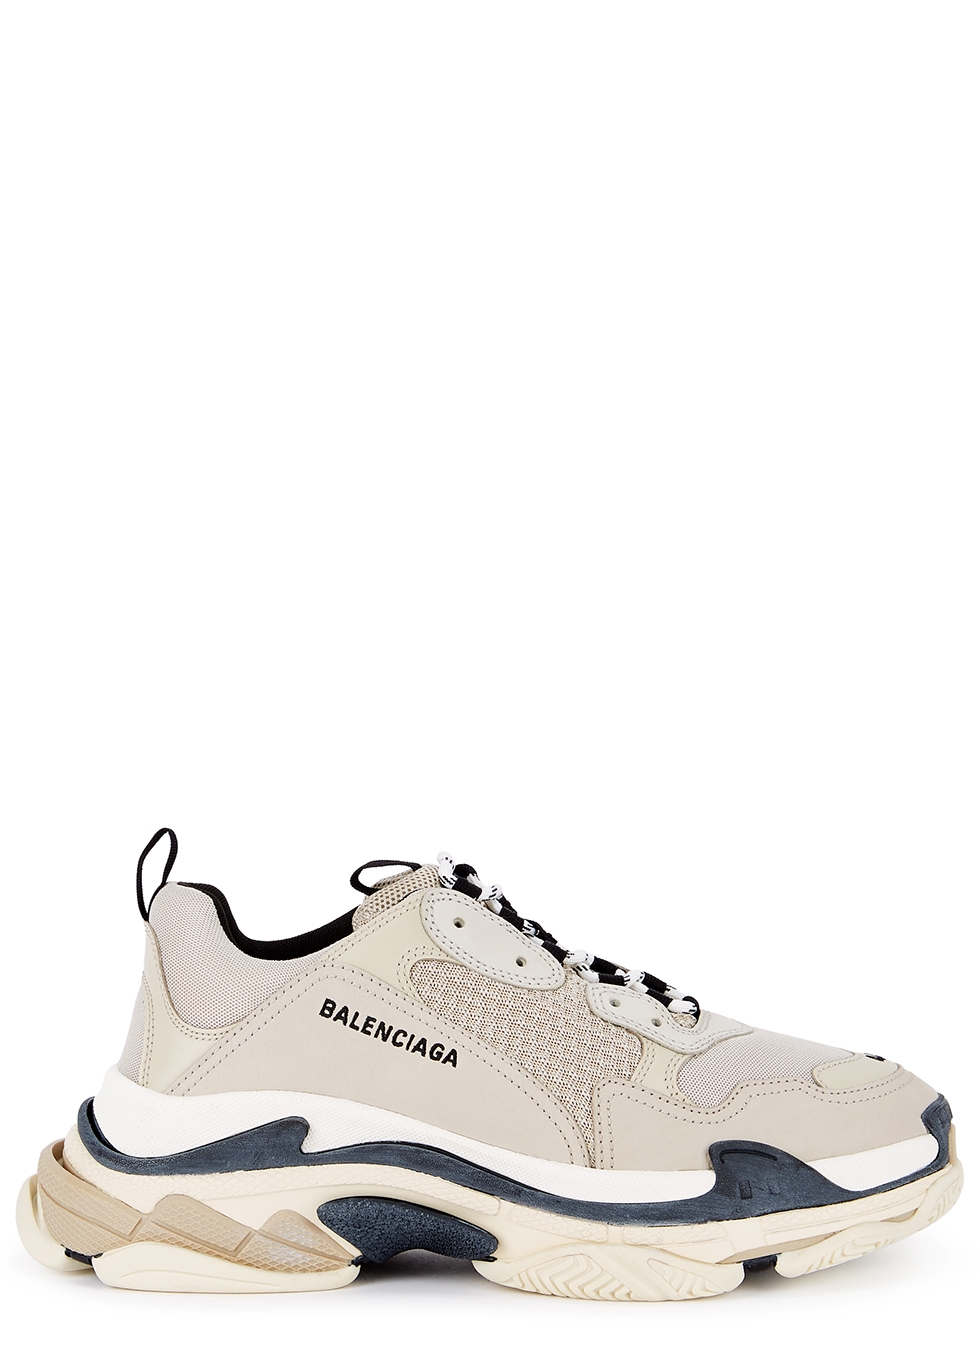 balenciaga trainers outlet